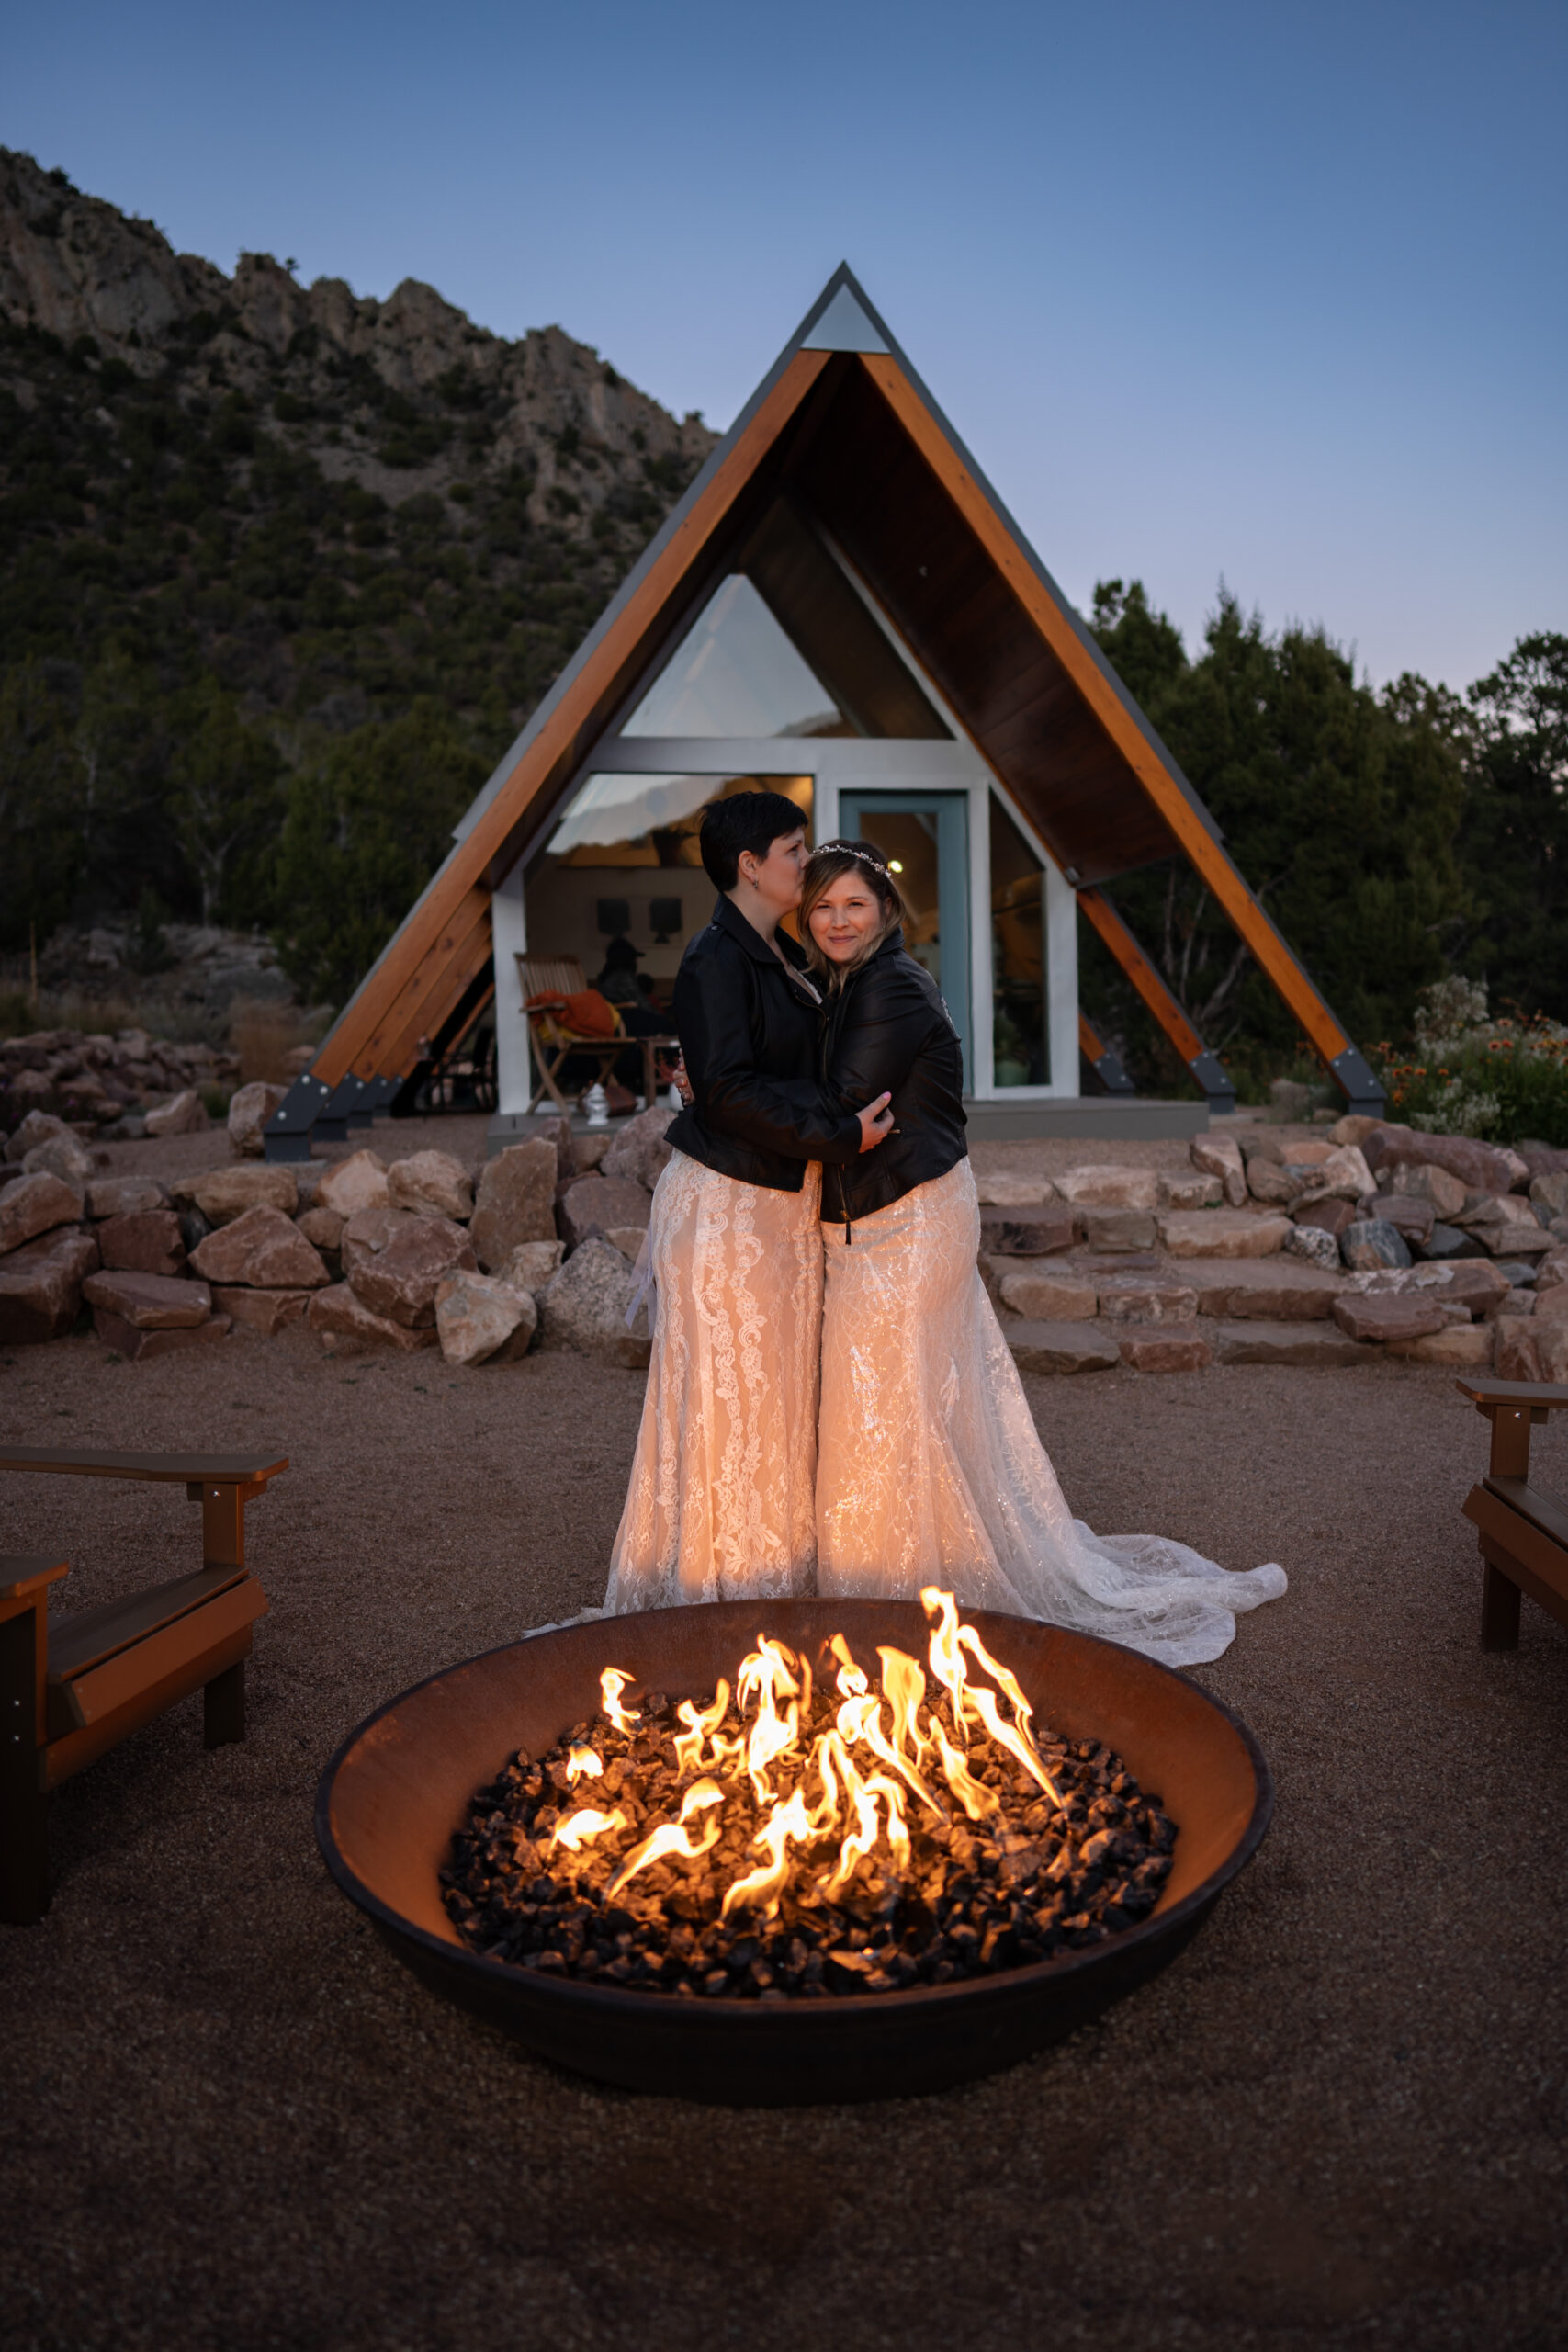 Two brides embracing each other in front of a fire wearing their dresses and matching black leather jackets in front of their A-Frame cabin in Colorado.